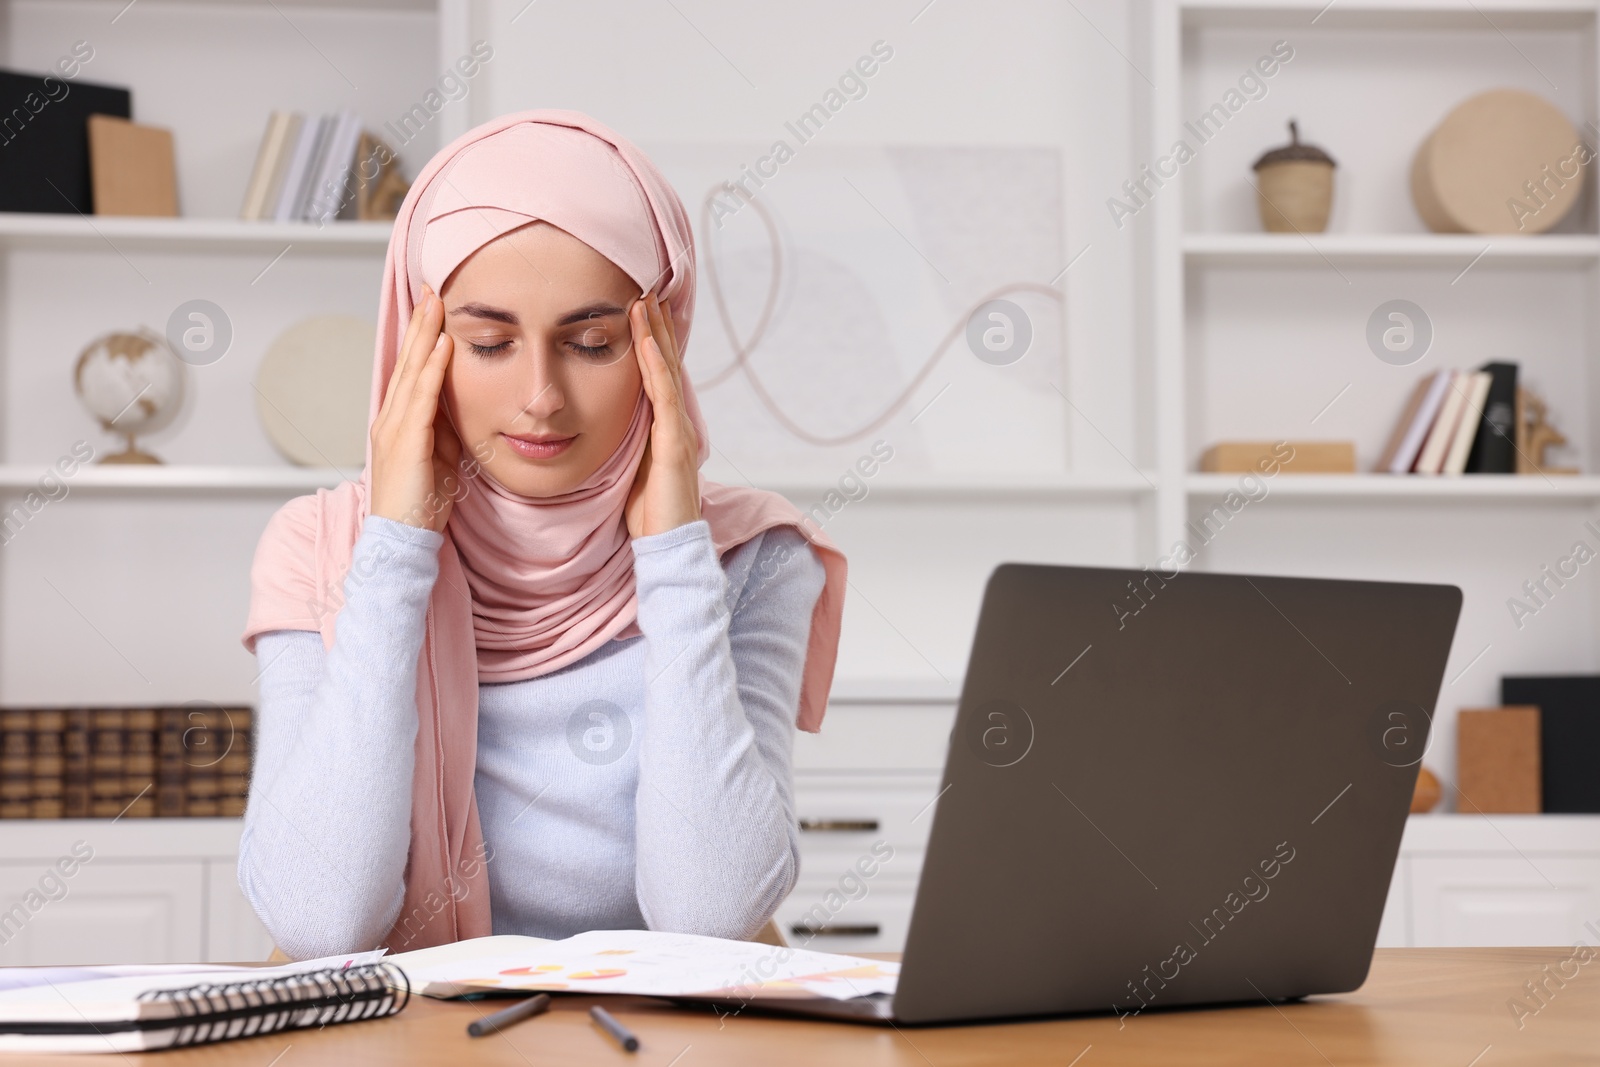 Photo of Tired Muslim woman in hijab working near laptop at wooden table in room